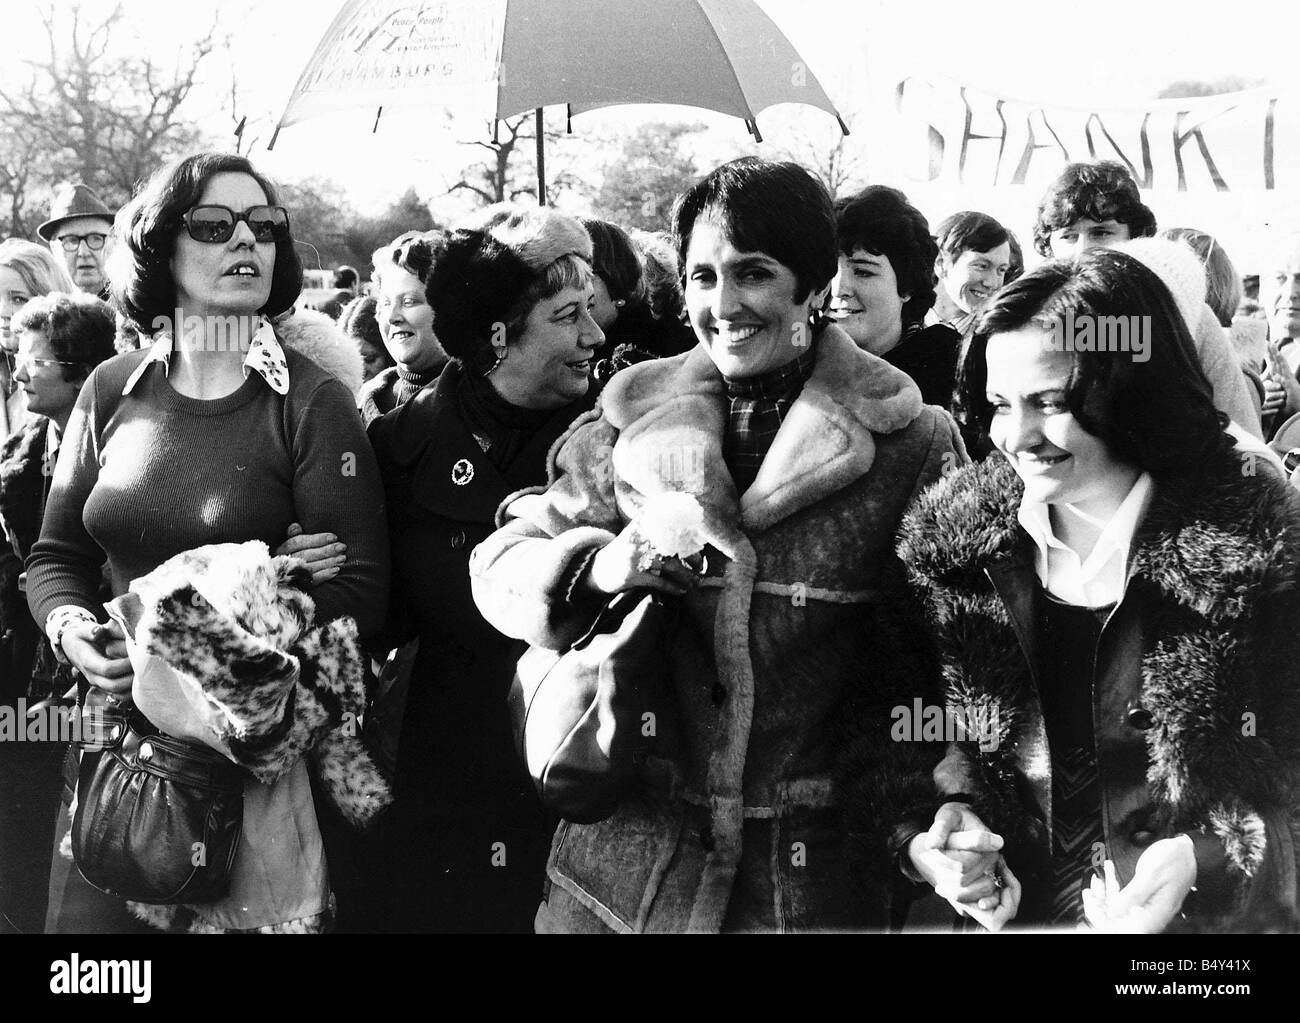 Betty Williams and Joan Baez American folk singer famous for protest songs anti Vietnam war join the women peace protestors of Northern Ireland on the streets of London as they march in 1976 Stock Photo